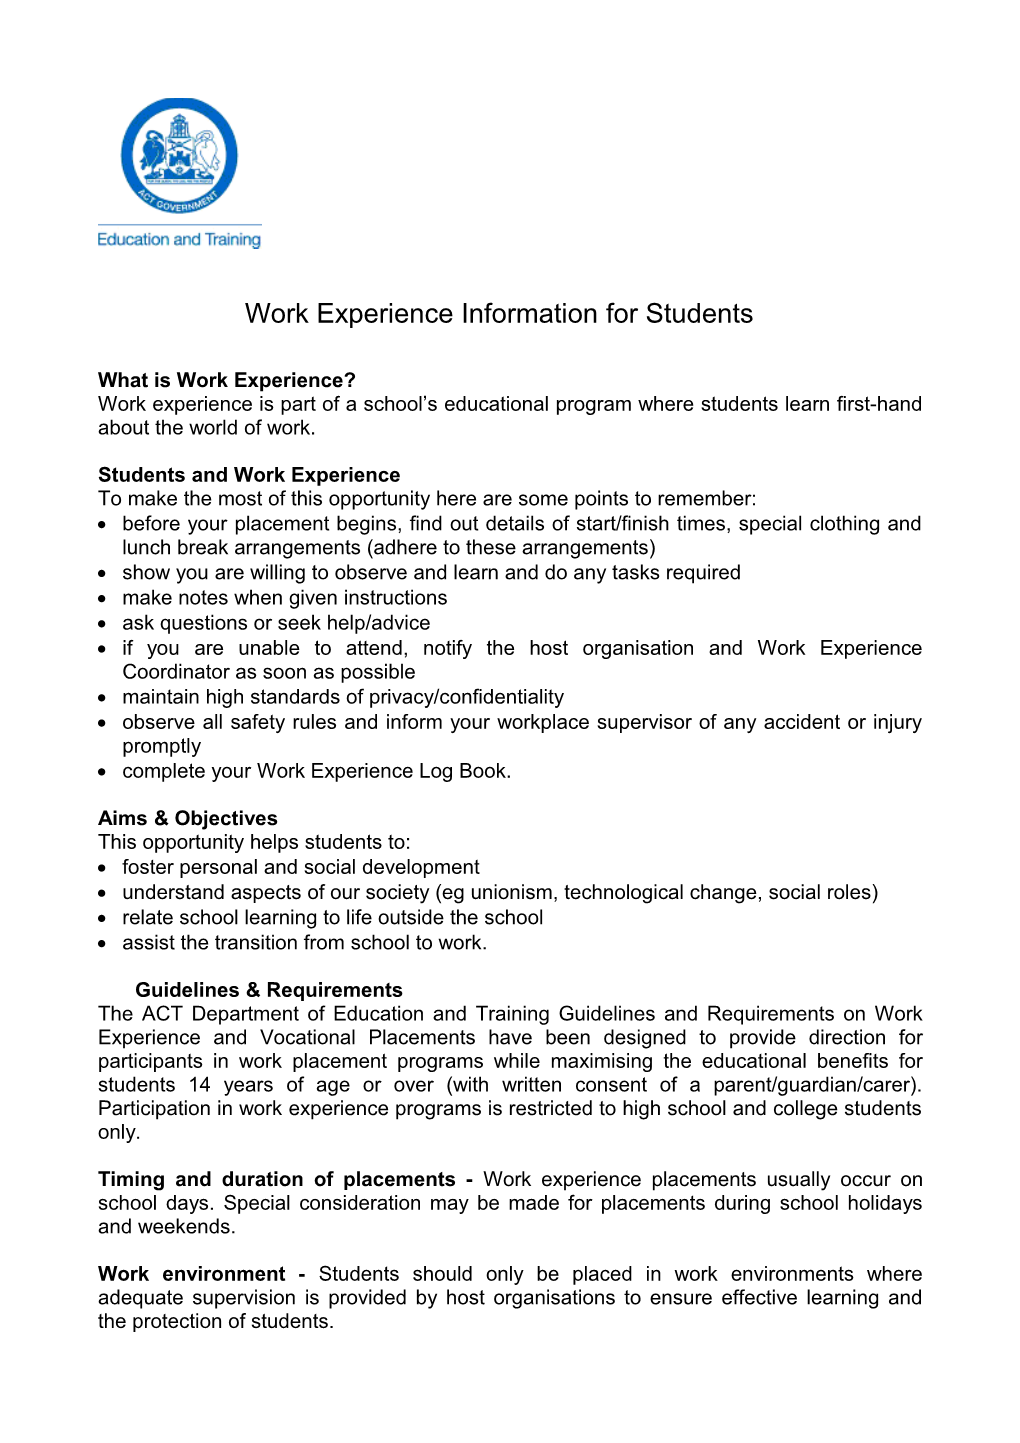 Work Experience Information for Students